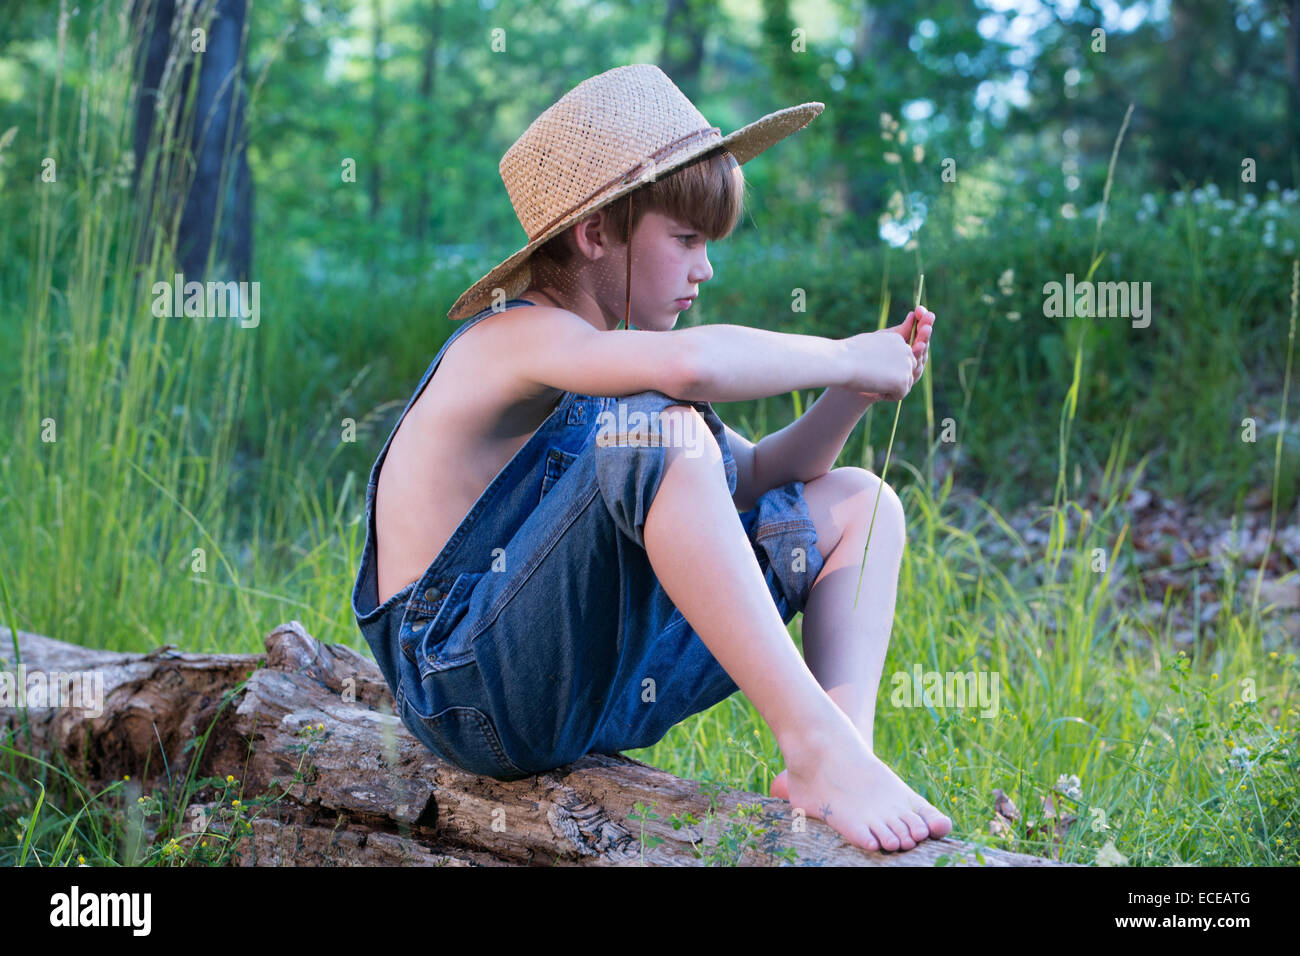 Young boy wearing straw hat sitting on log Stock Photo